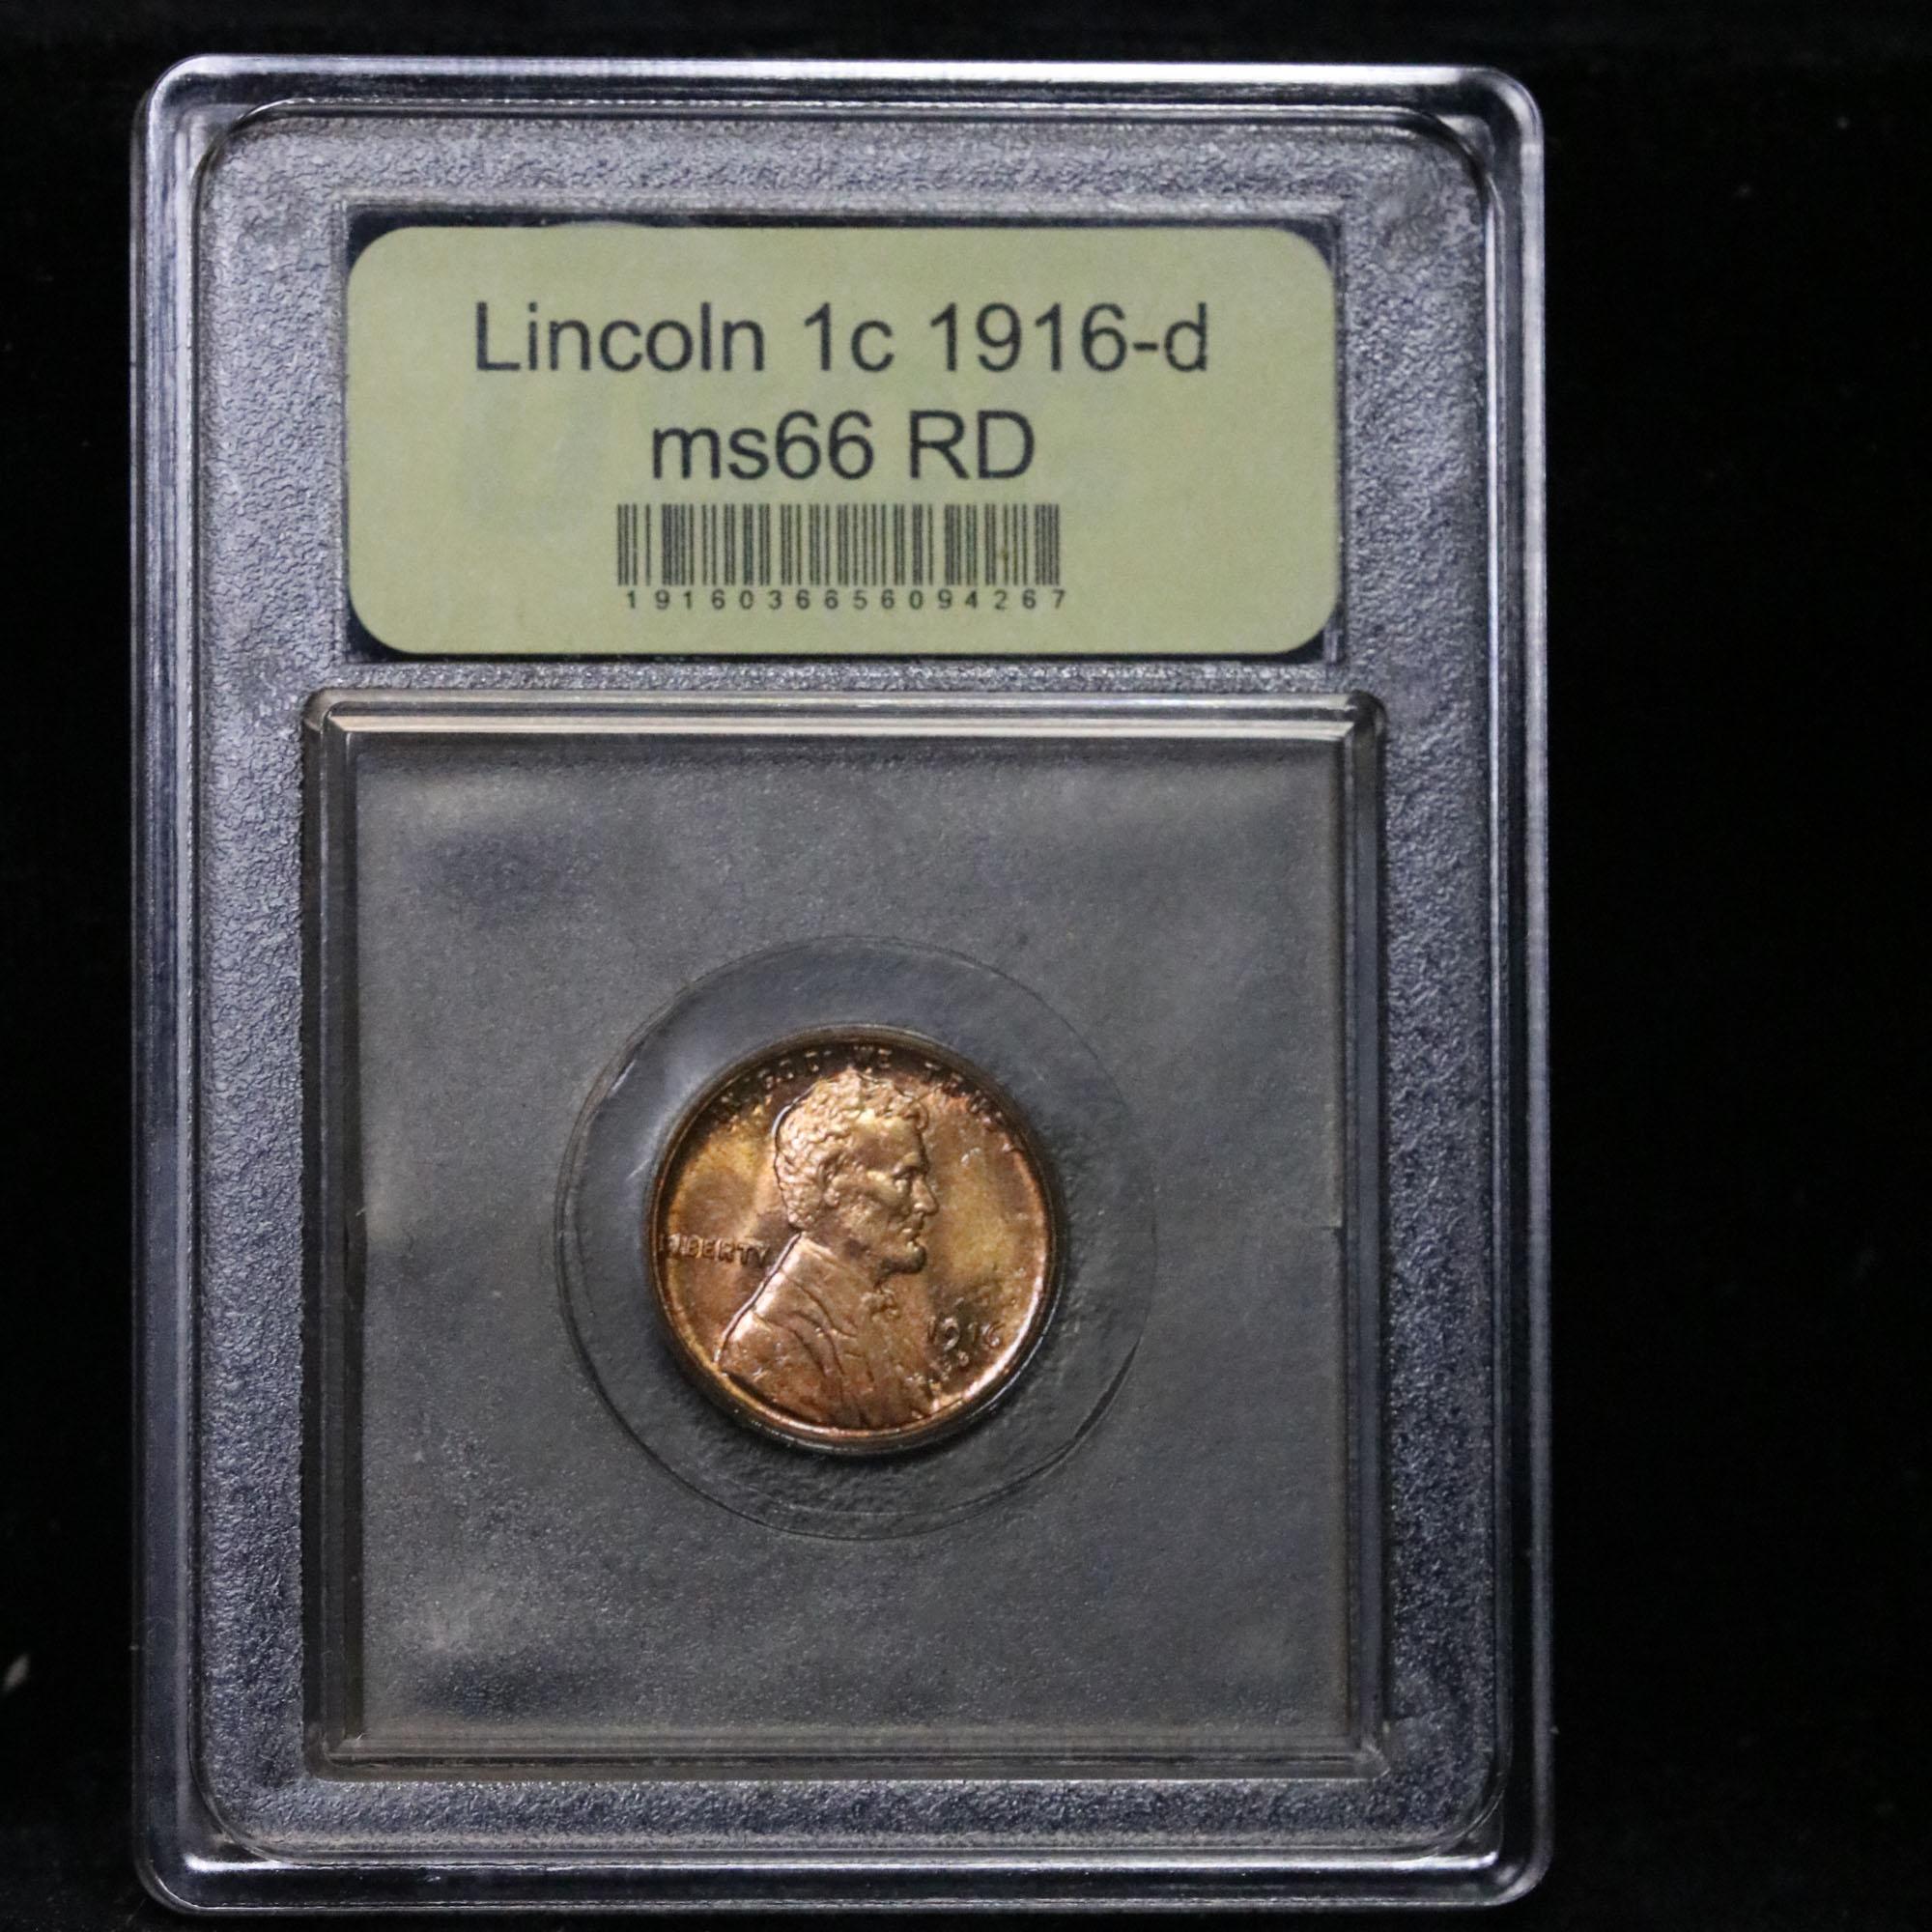 ***Auction Highlight*** 1916-d Lincoln Cent 1c Graded GEM+ Unc RD by USCG (fc)